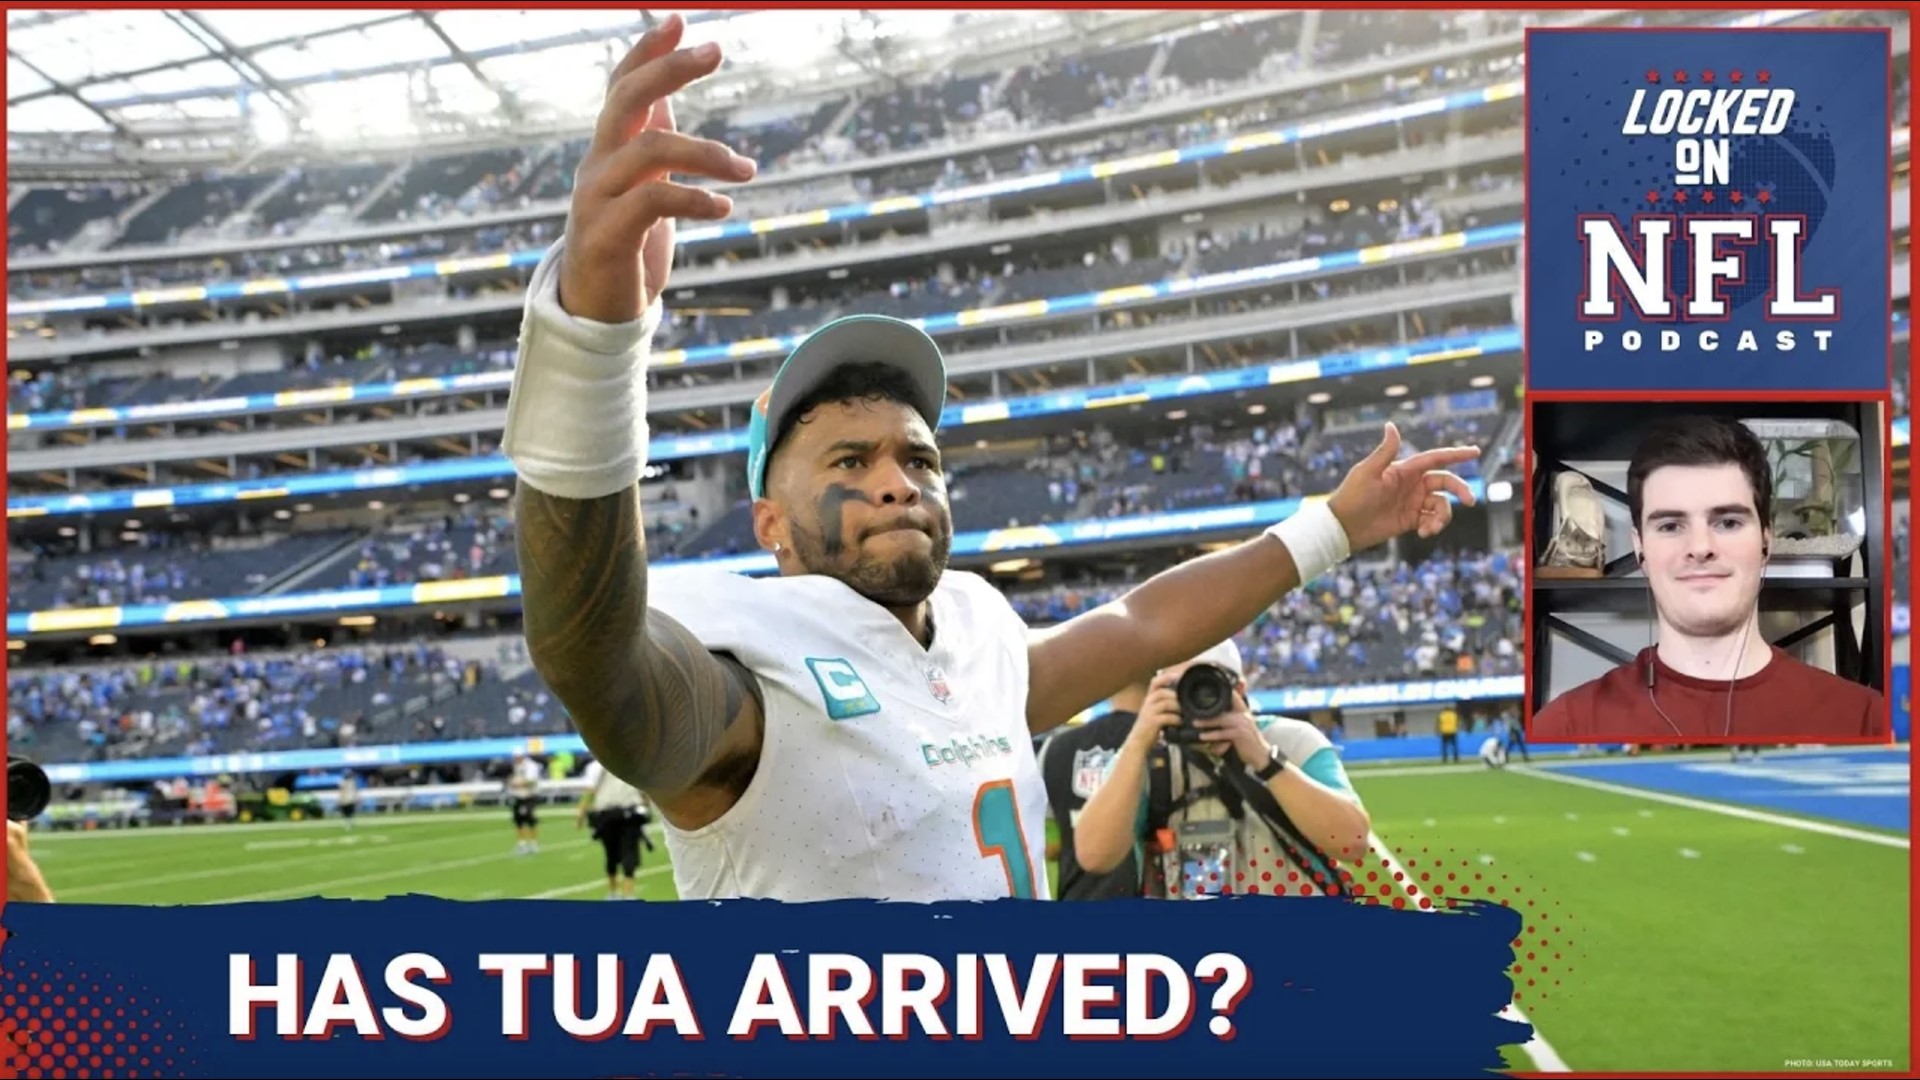 We look at if Tua Tagovailoa has finally arrived for the Miami Dolphins, what the Tennesee Titans should do with Ryan Tannehill, and the Tampa Bay Buccaneers' big W